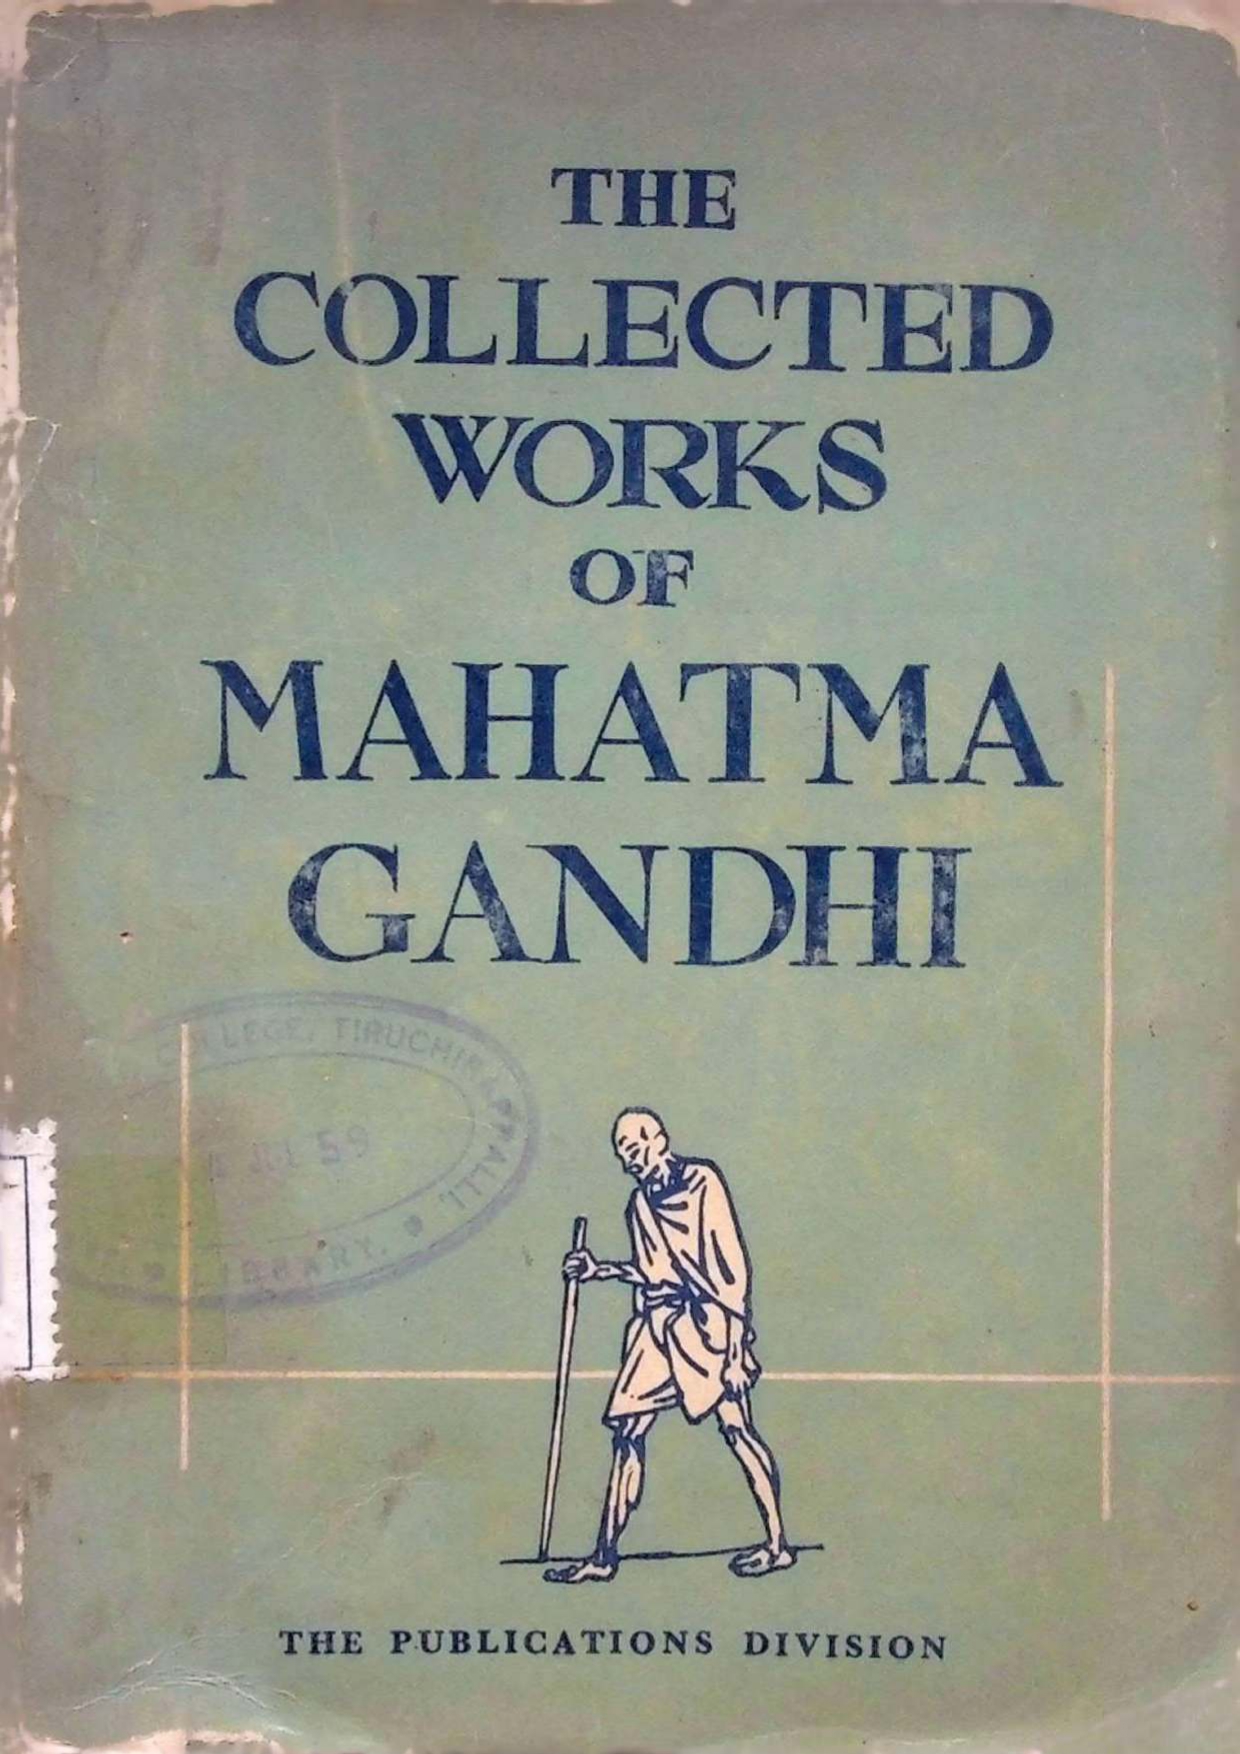 Collected Works of Mahatma Gandhi – JMC E-LIBRARY